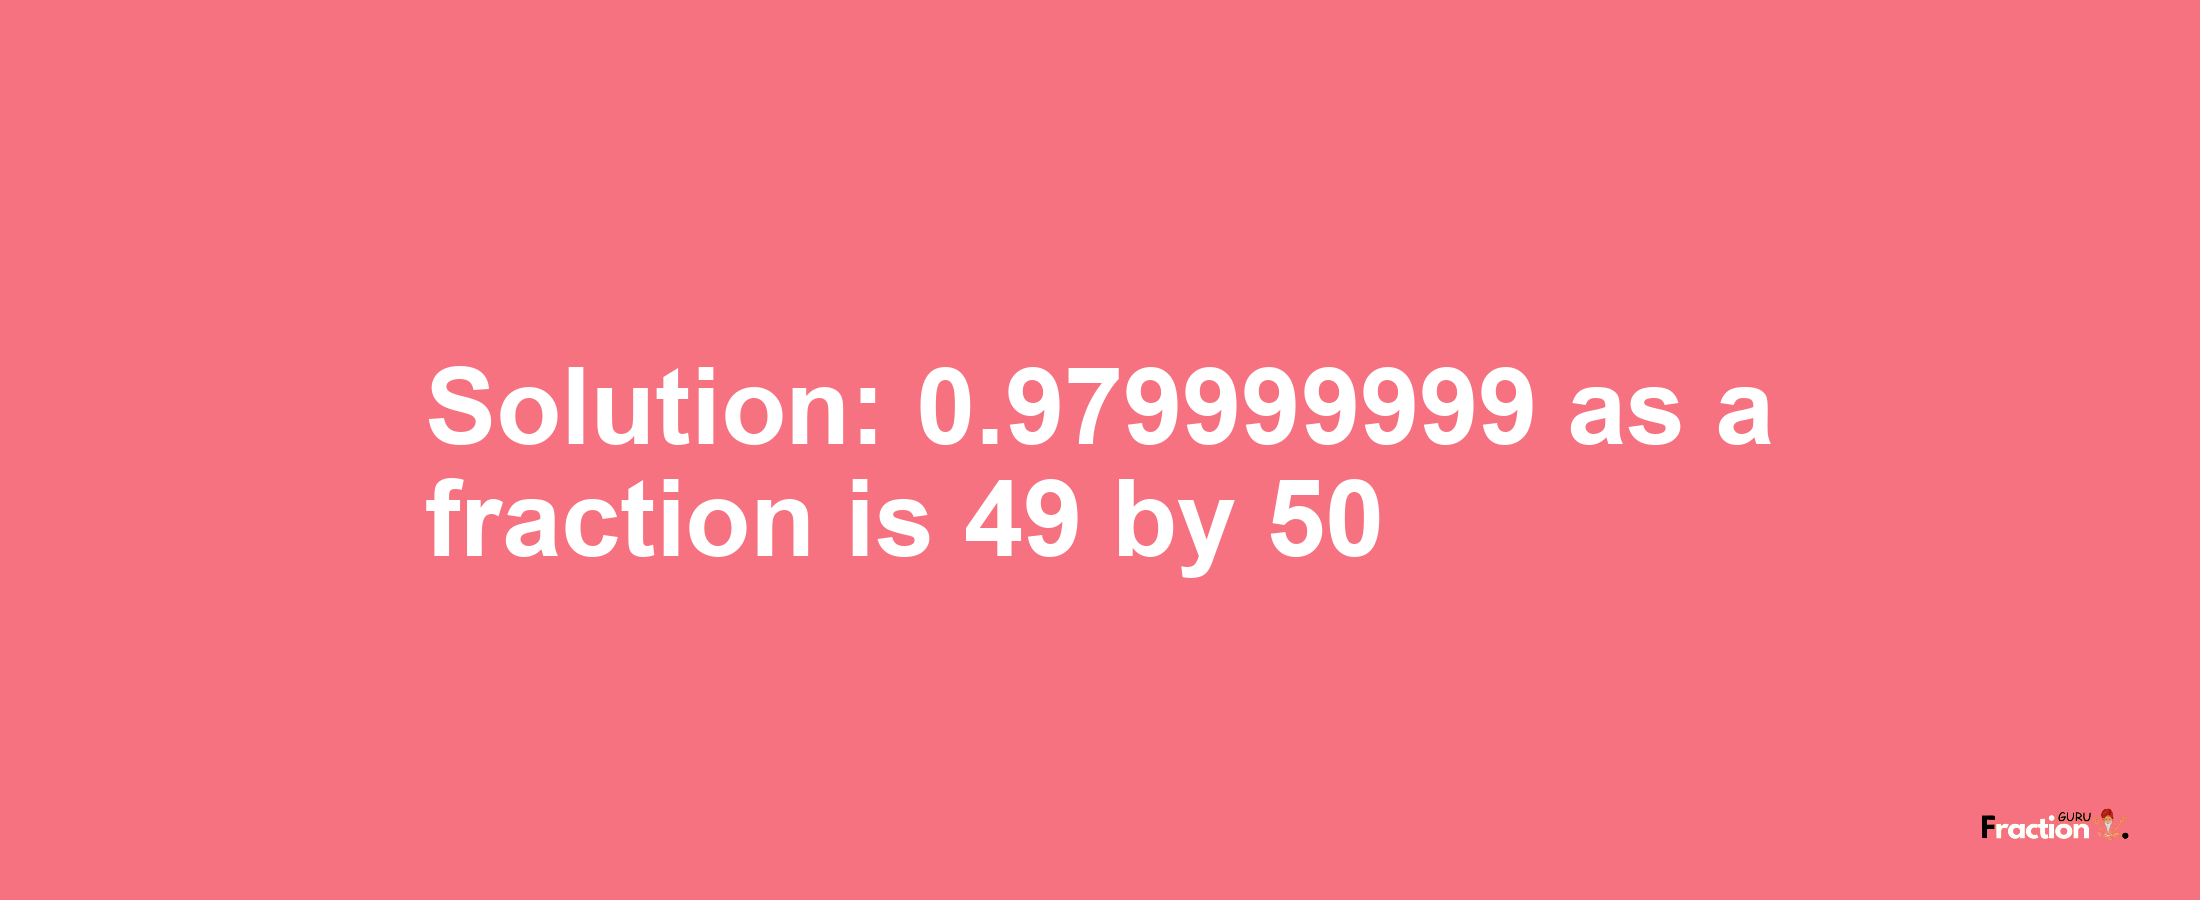 Solution:0.979999999 as a fraction is 49/50